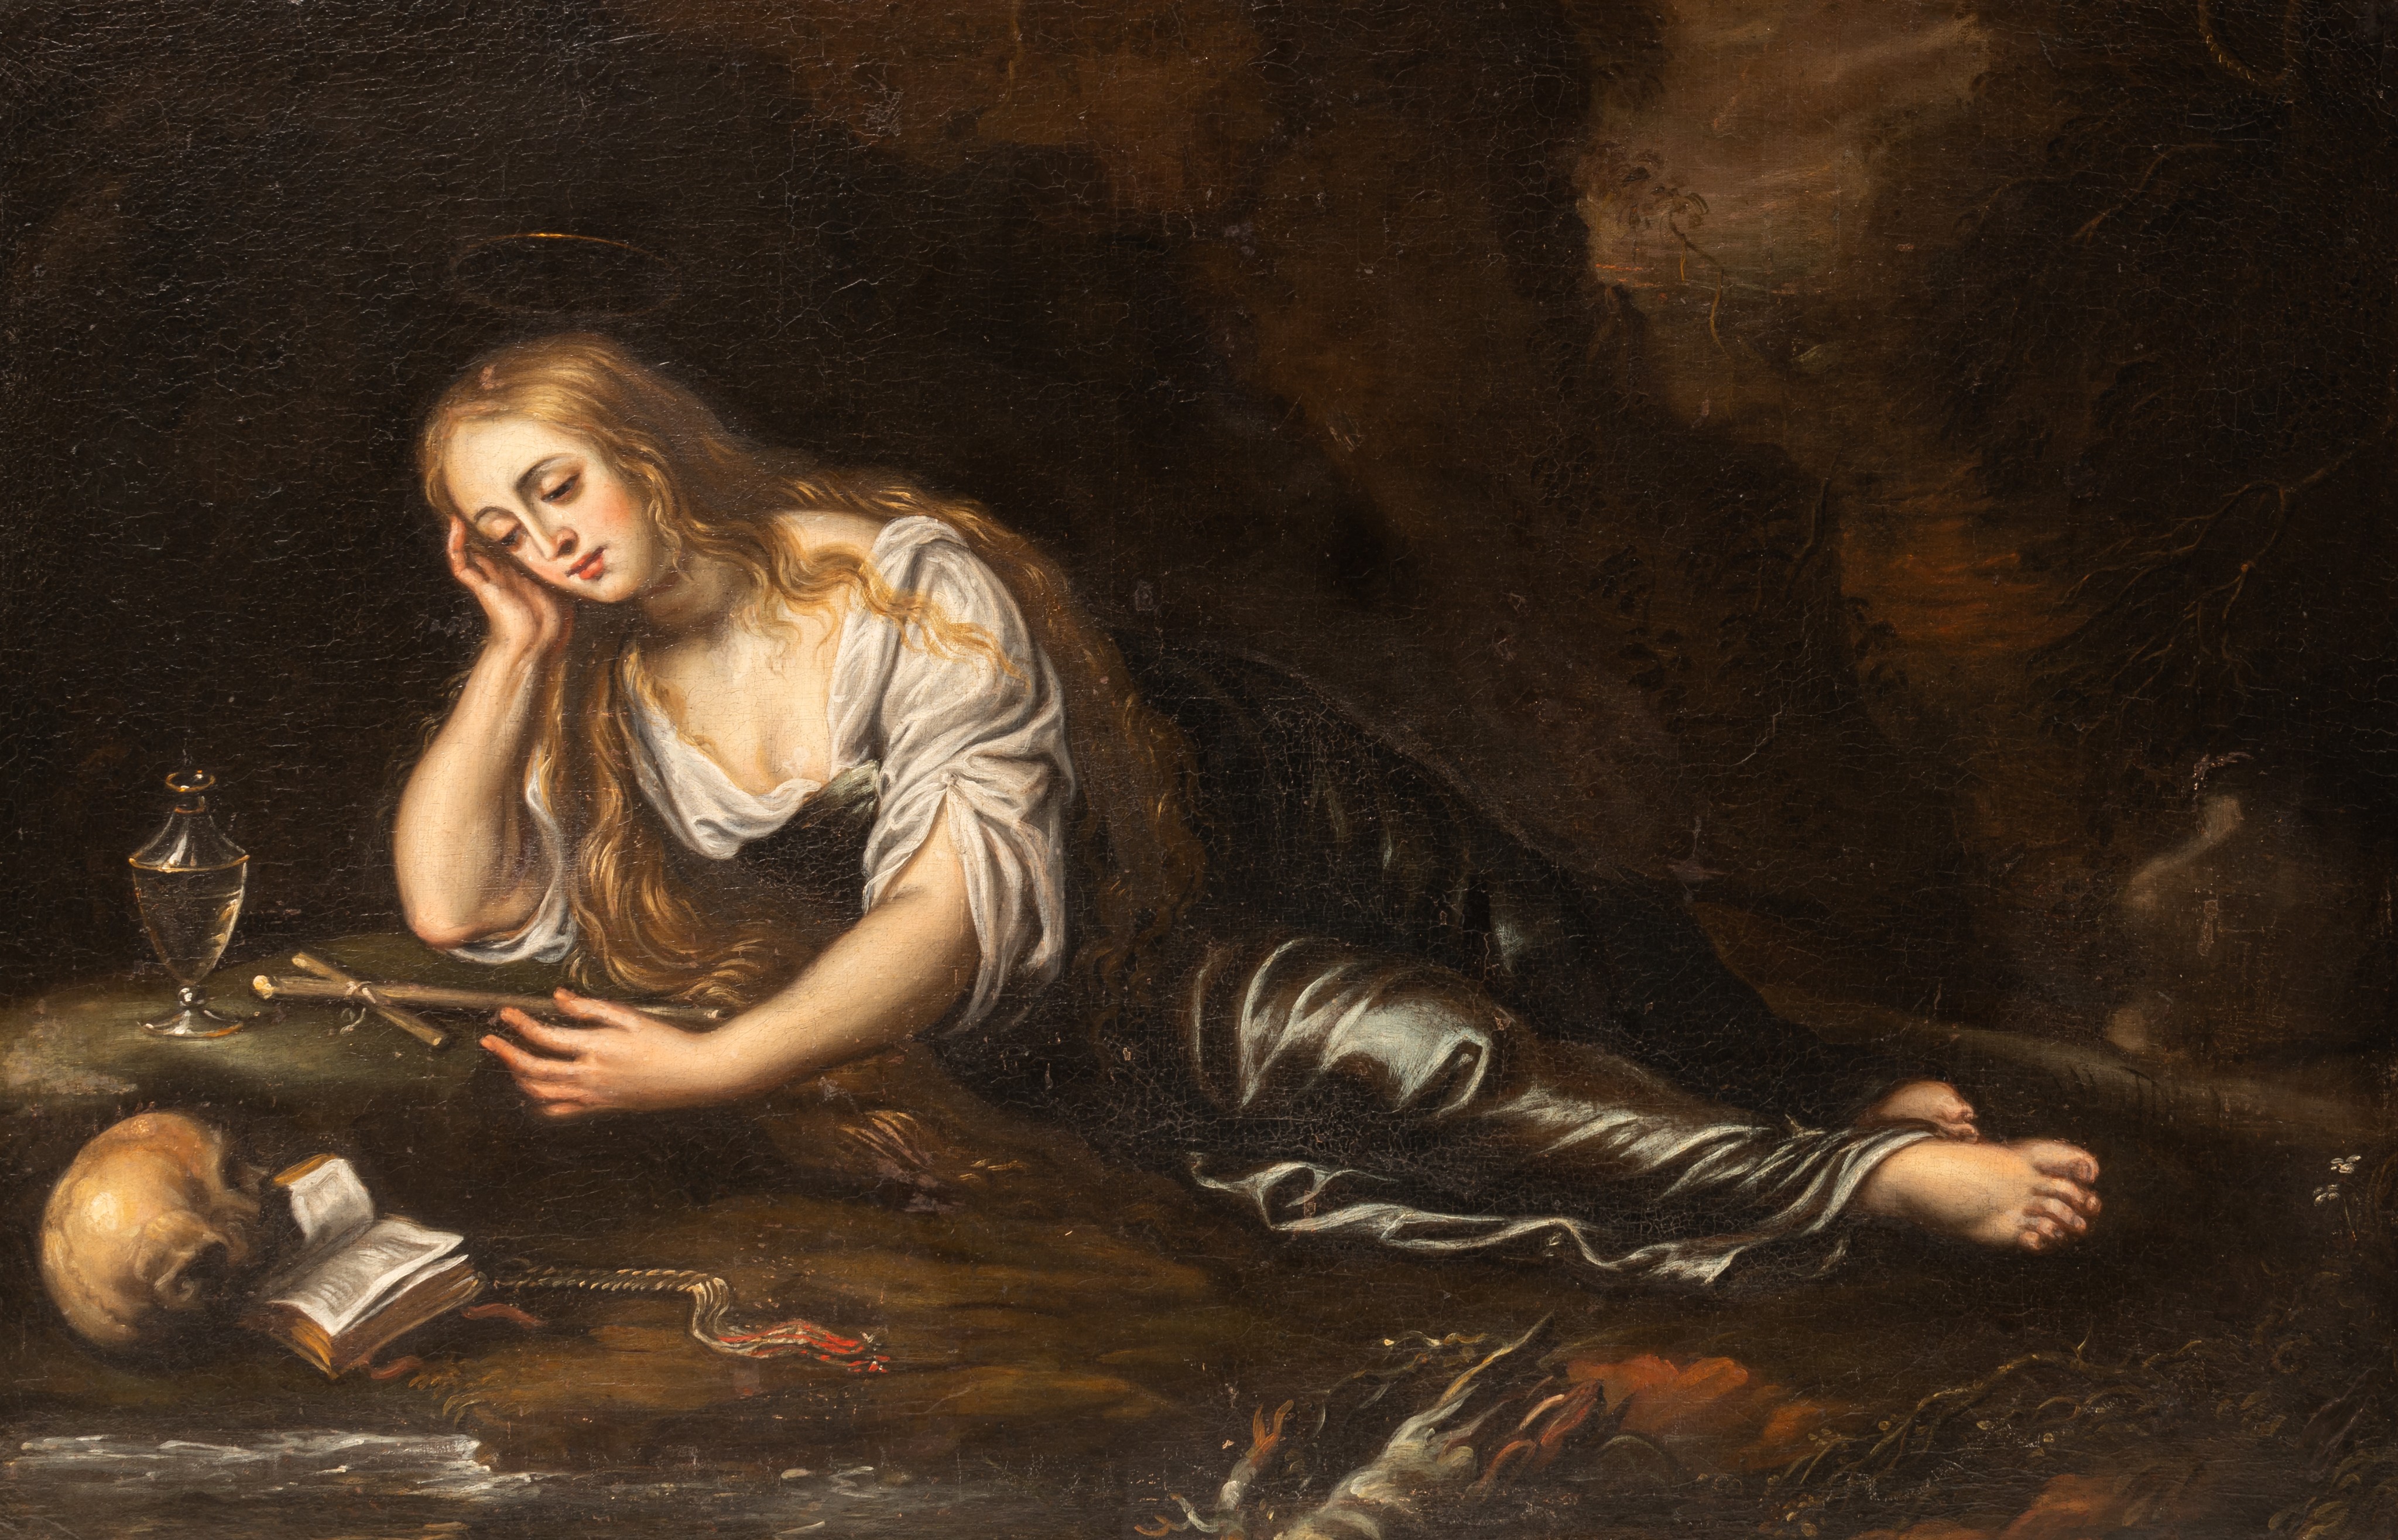 The penitent Mary Magdalene, 17thC, oil on canvas 85 x 130 cm. (33.4 x 51.1 in.), Frame: 98 x 143 cm